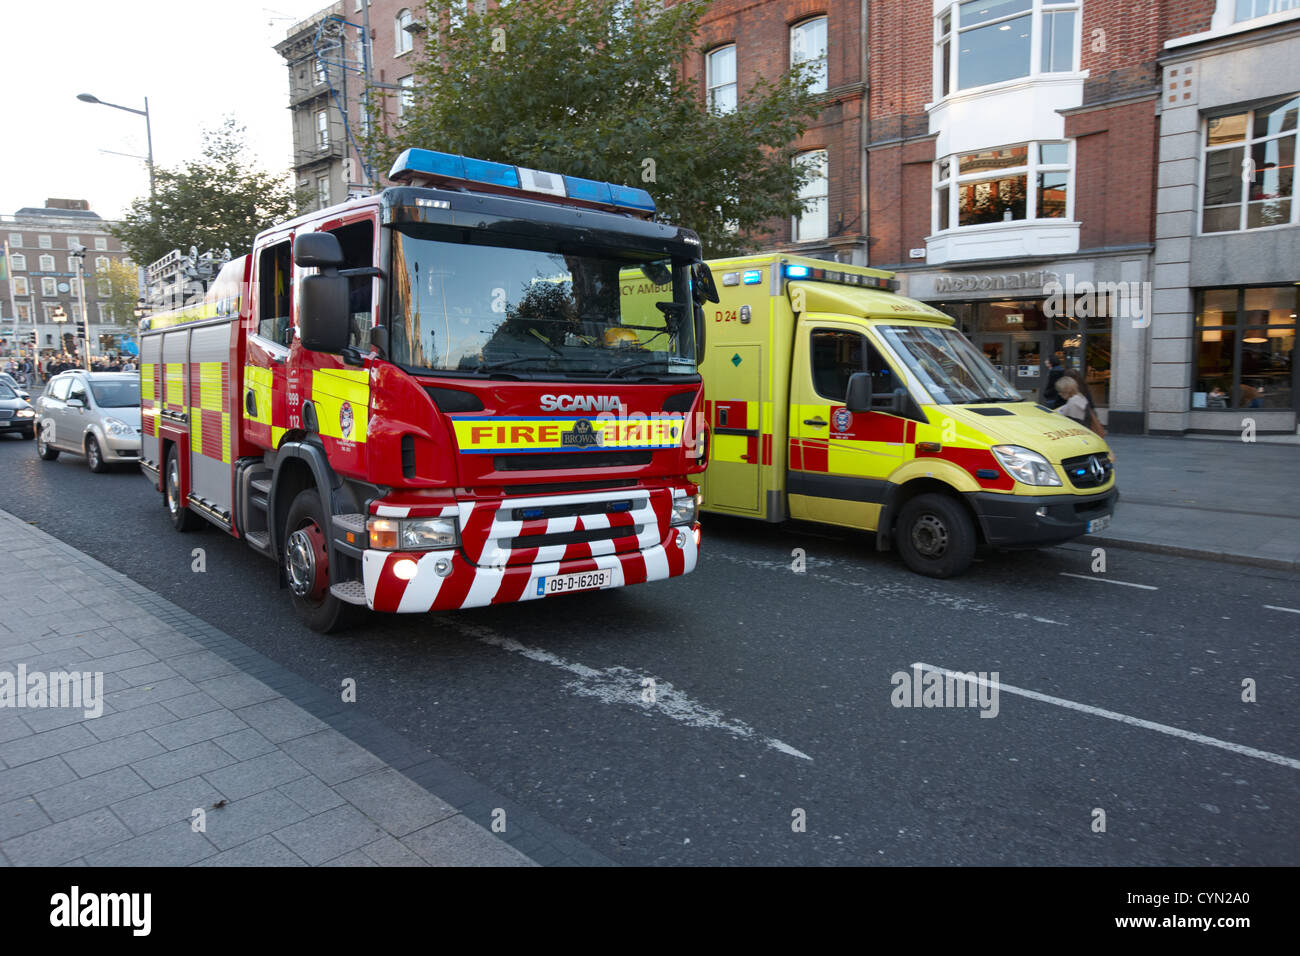 dublin fire brigade engine and emergency ambulance on call out oconnell street dublin republic of ireland Stock Photo